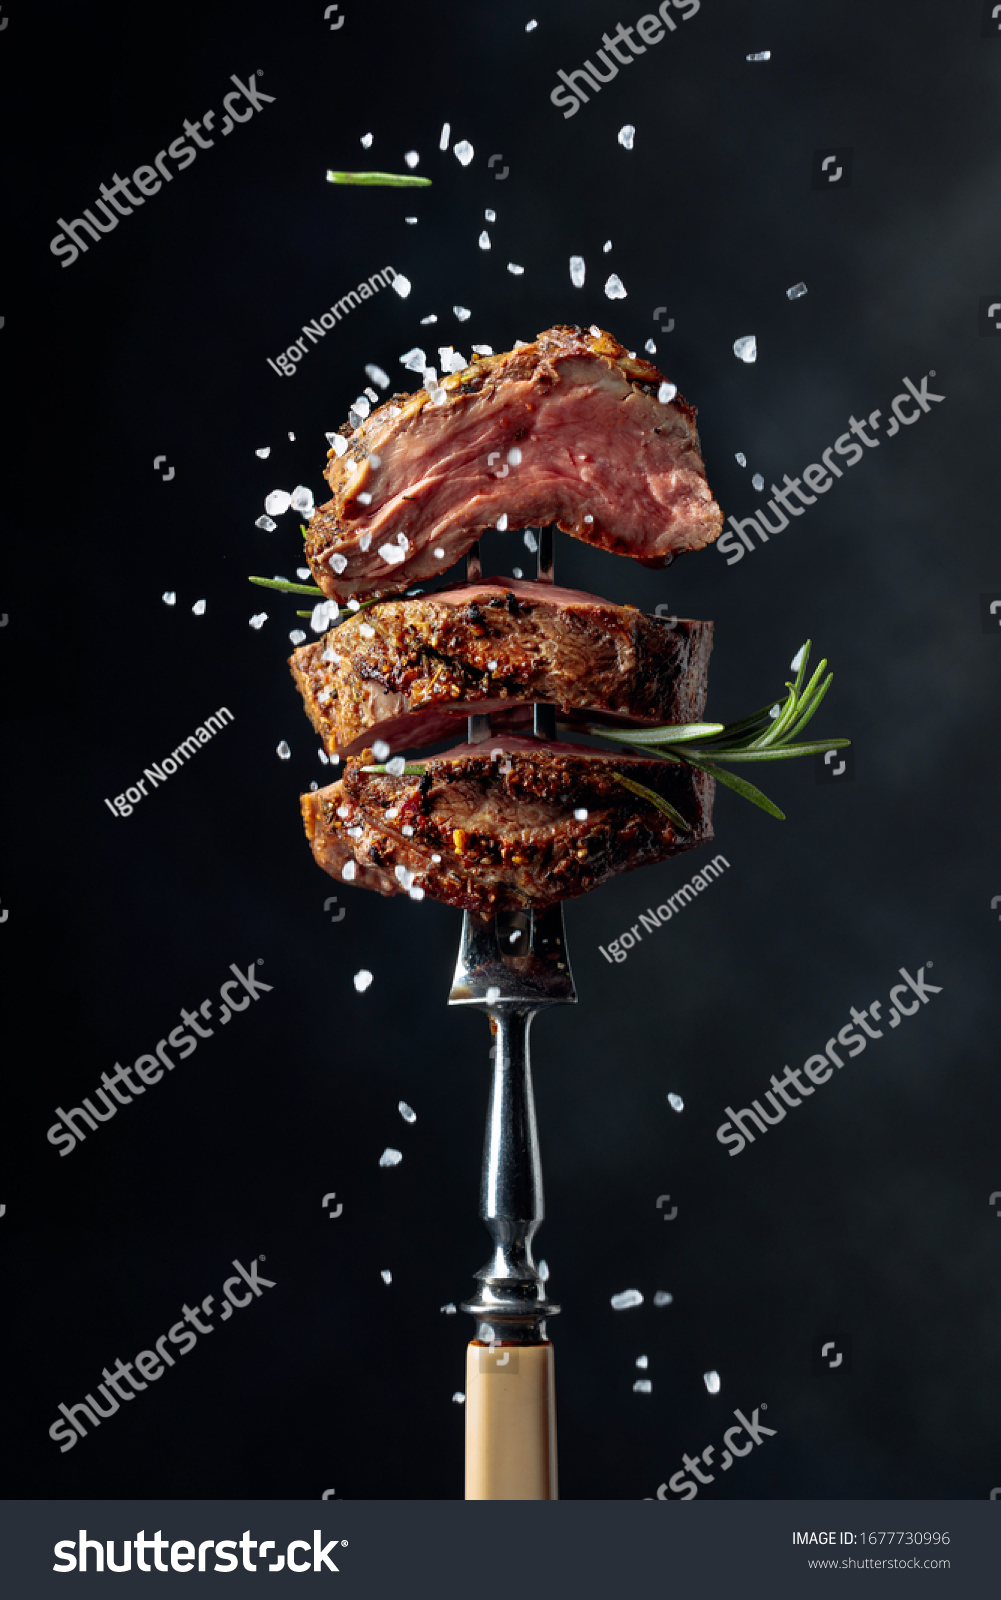 Grilled beef steak with spices on a black background. Beef steak on a fork sprinkled with rosemary and sea salt.    #1677730996